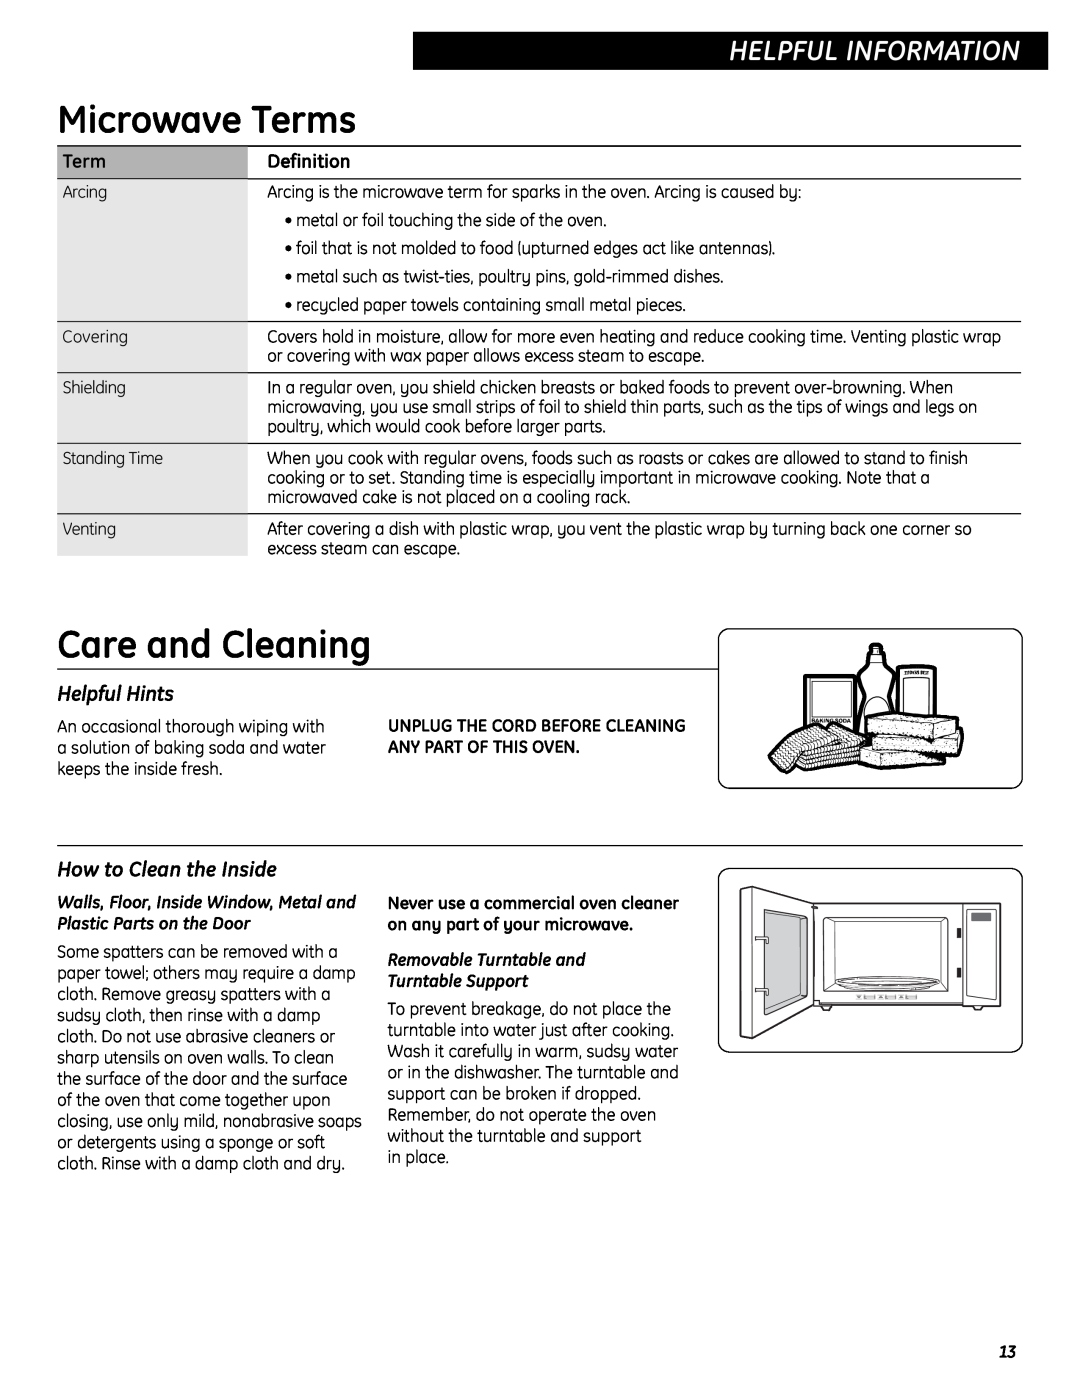 GE JES0737 Microwave Terms, Care and Cleaning, Helpful Information, Helpful Hints, How to Clean the Inside, Definition 